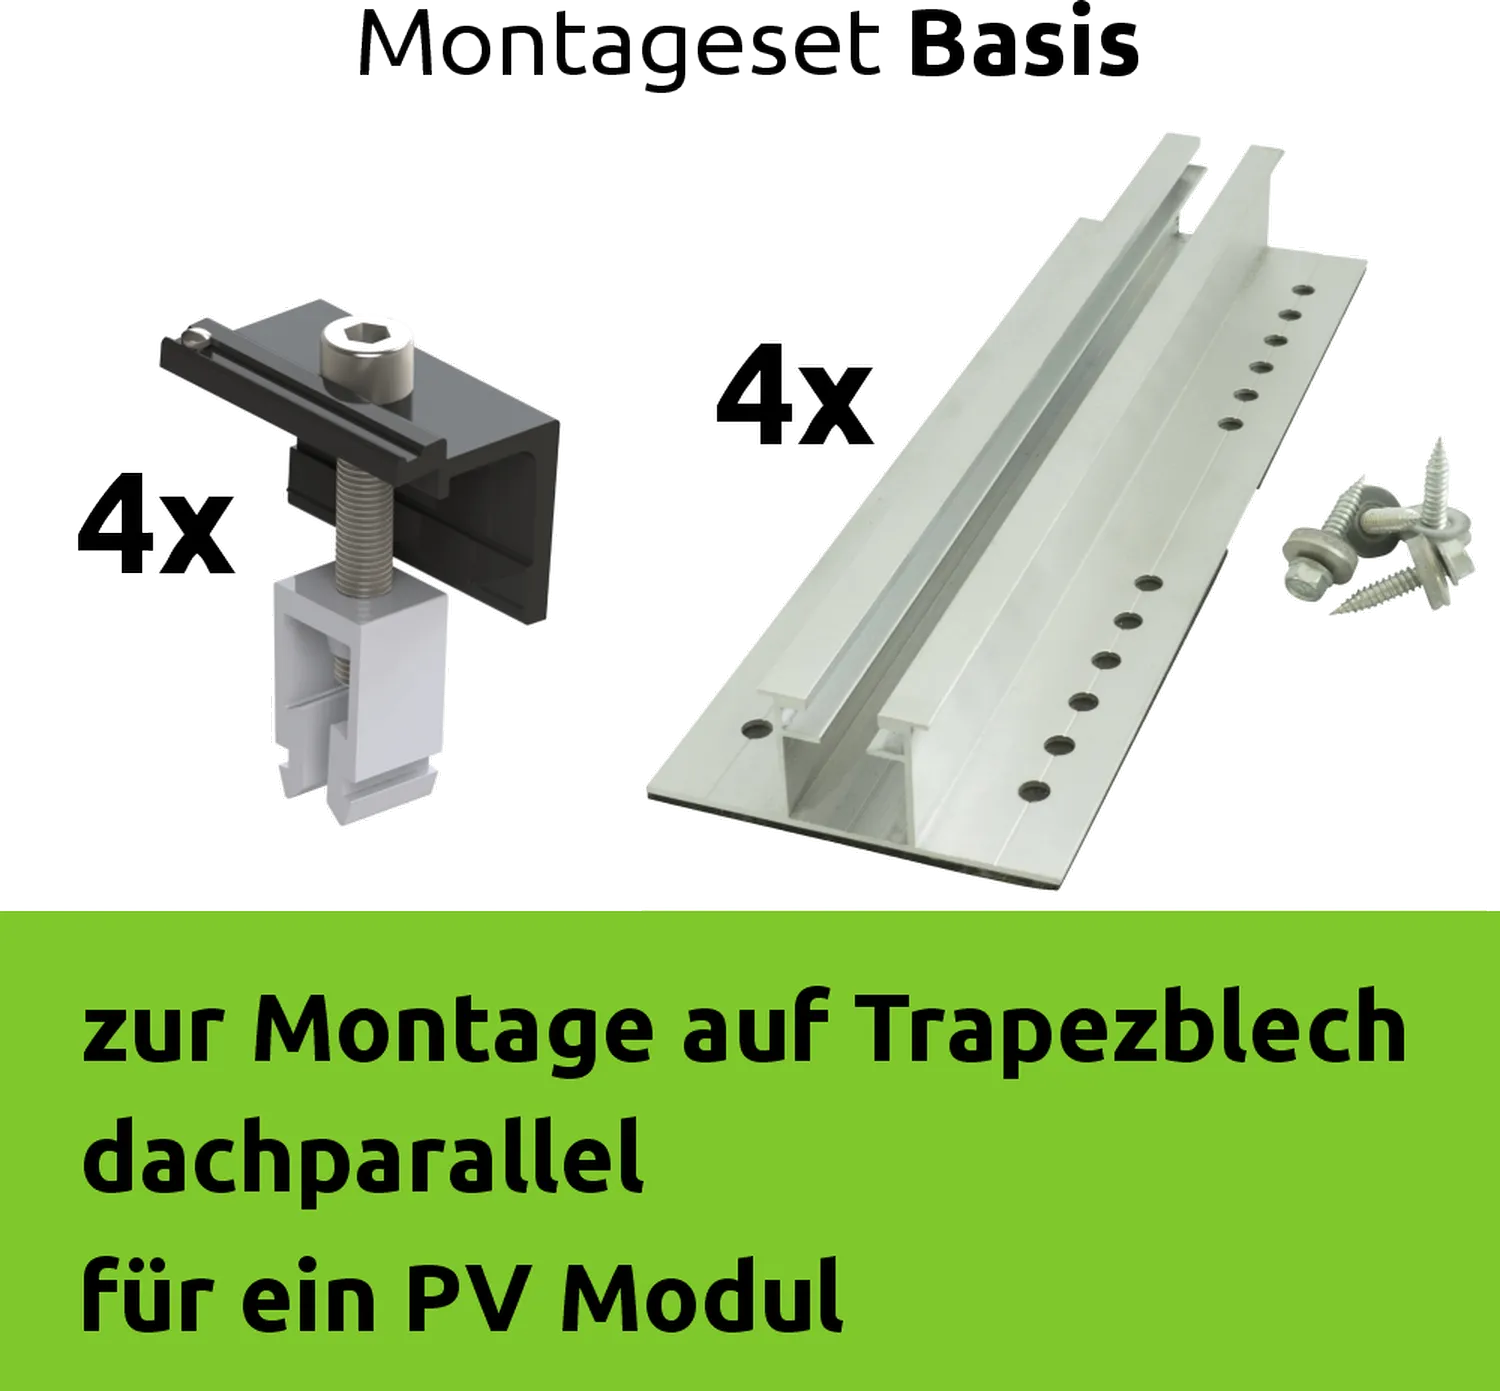 PV Montageset Basis Trapezblech